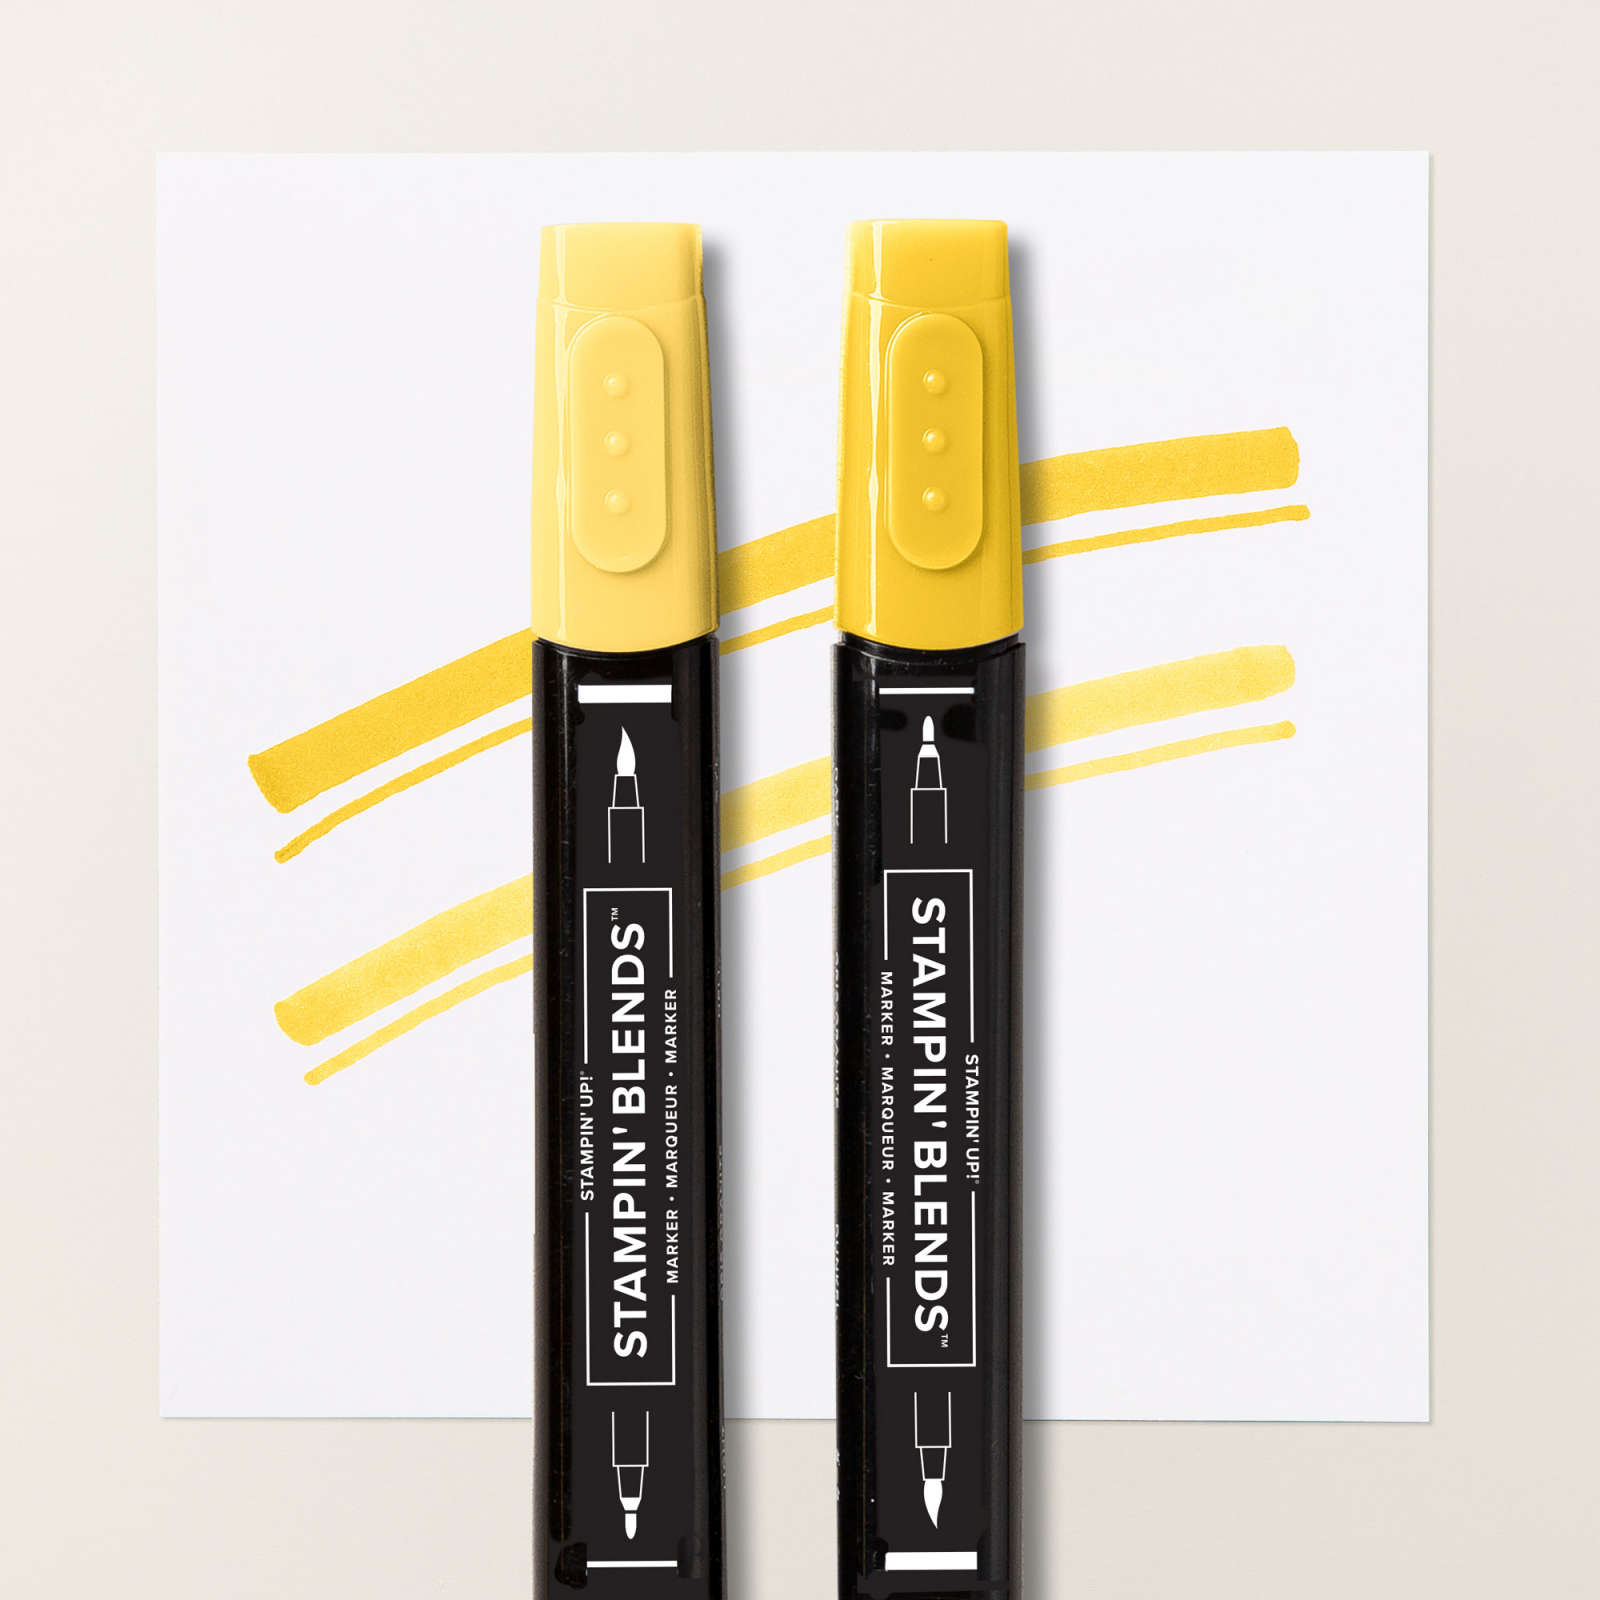 Daffodil Delight Stampin' Blends Alcohol Markers by Stampin' Up!